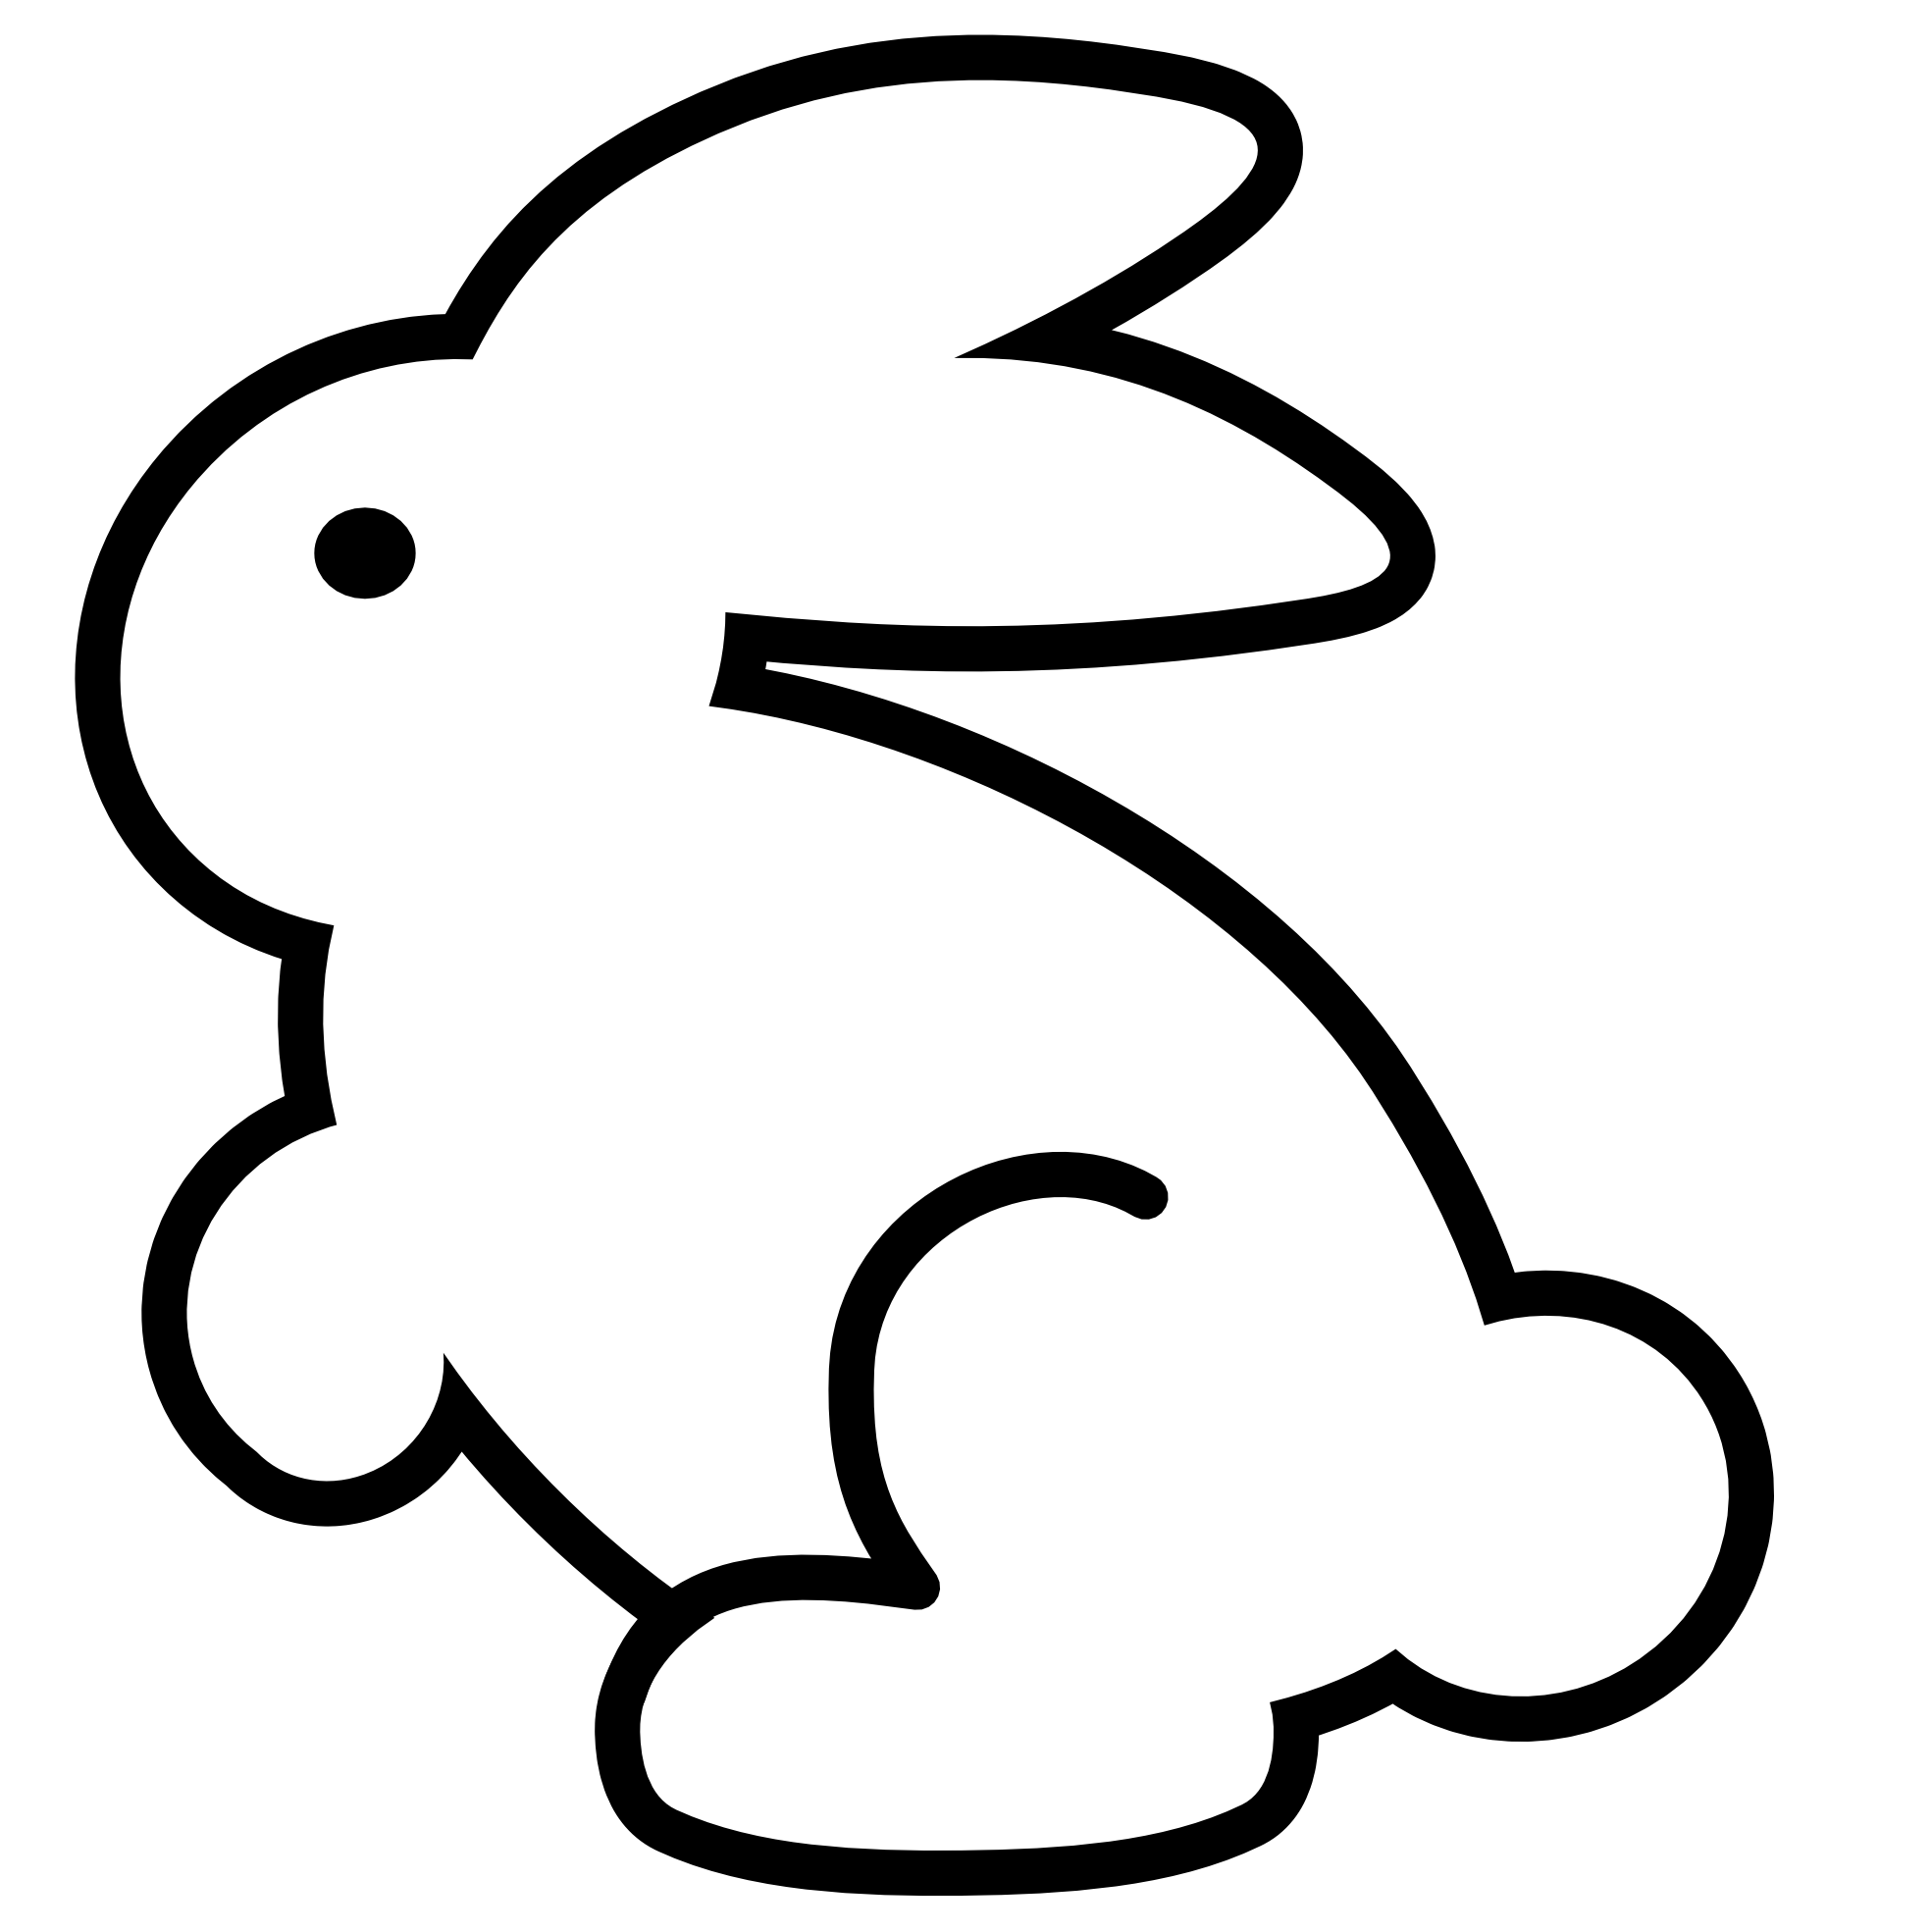 Bunny black and white. Trail clipart line dot